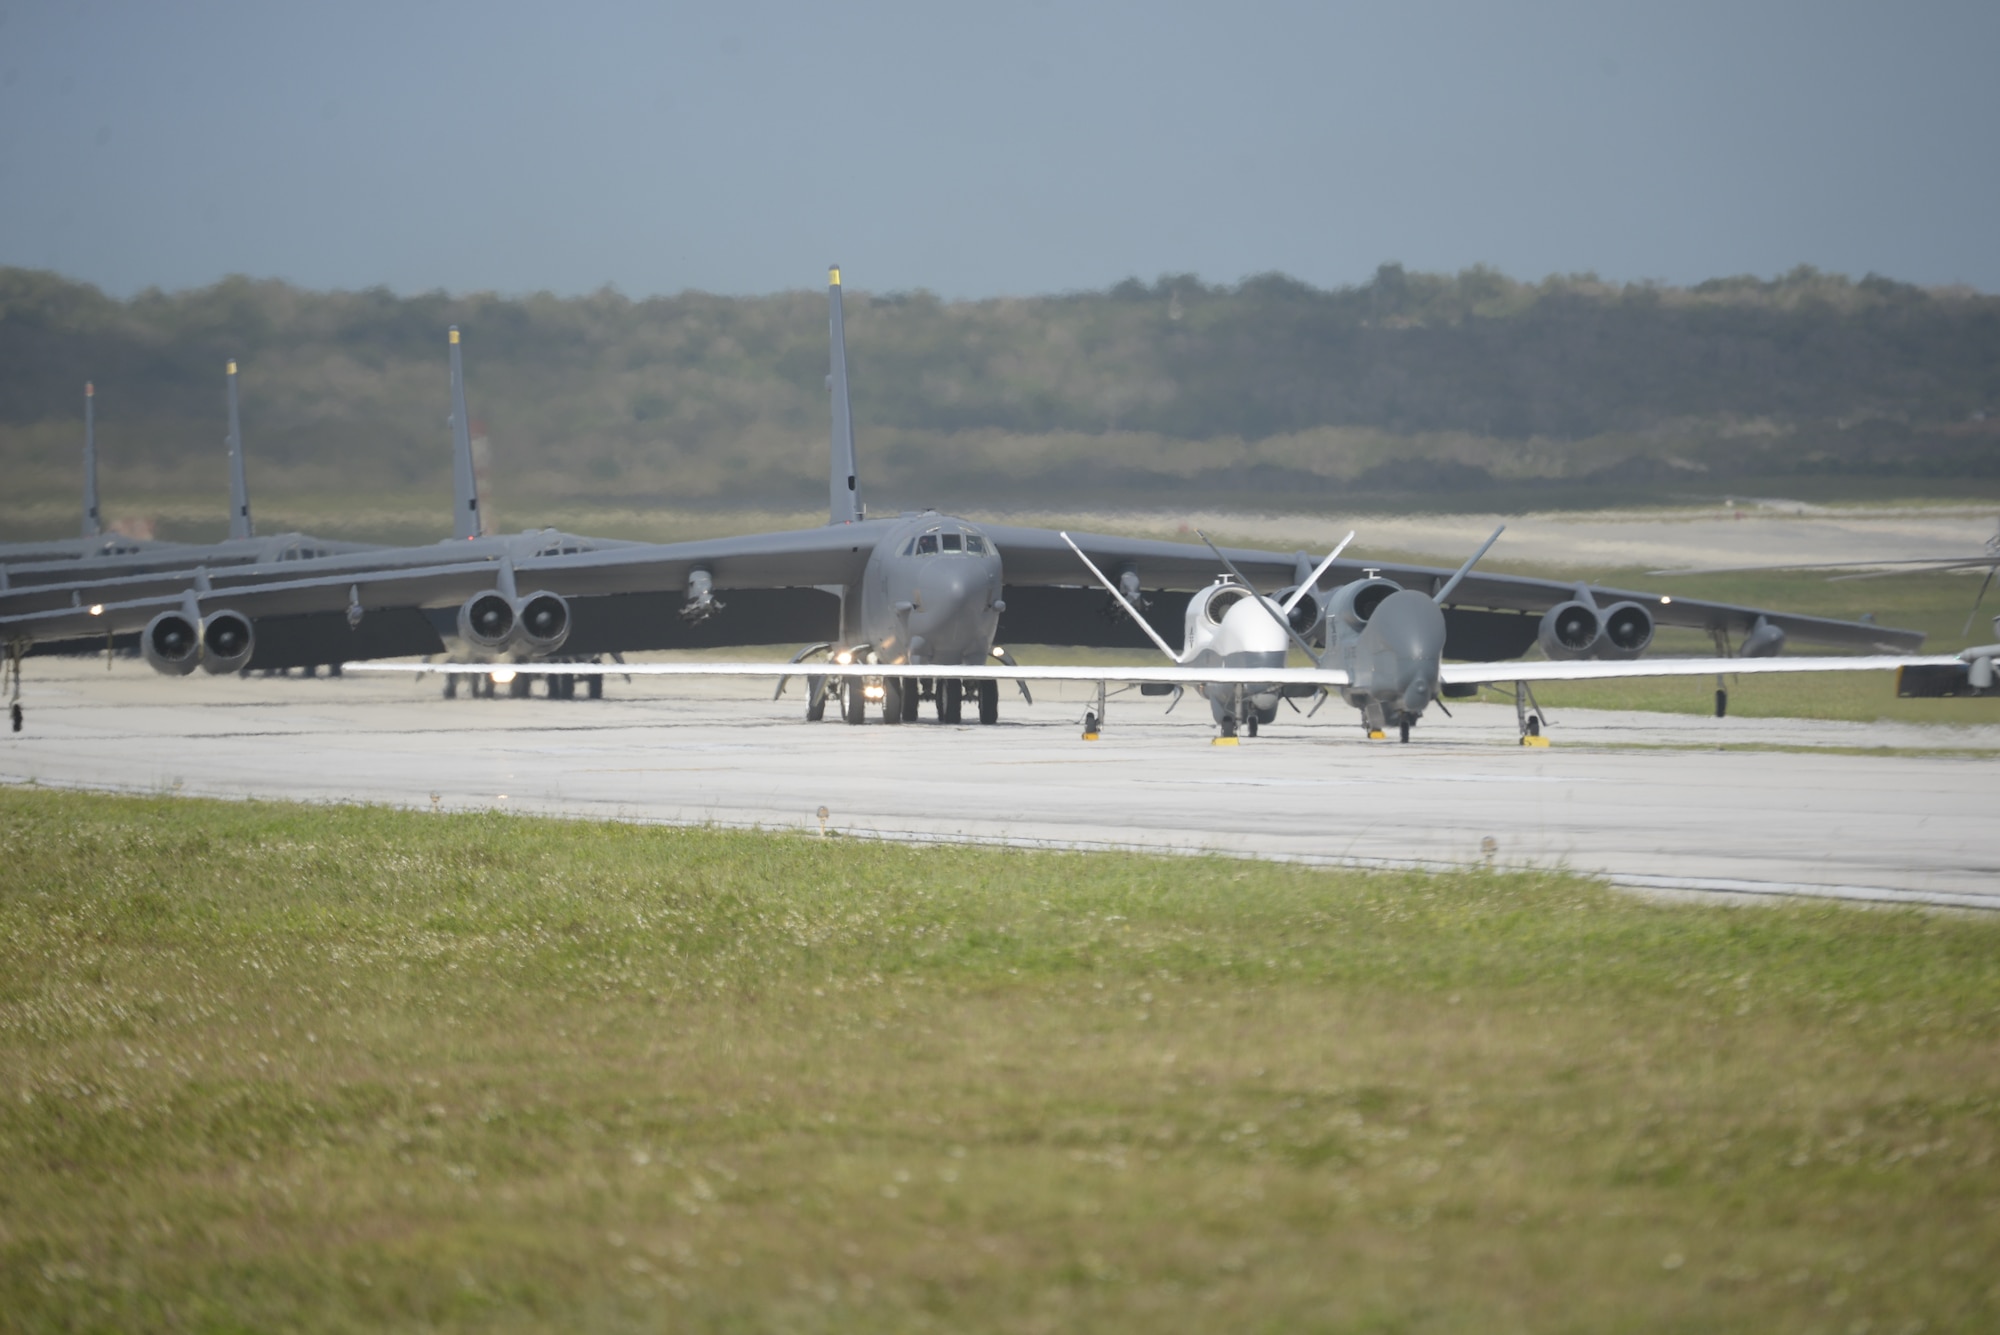 A U.S. Navy MH-60S Knighthawk, U.S. Air Force RQ-4 Global Hawk, Navy MQ-4C Triton, Air Force B-52 Stratofortresses, and KC-135 Stratotankers stationed at Andersen Air Force Base, Guam, perform an "Elephant Walk" April 13, 2020.